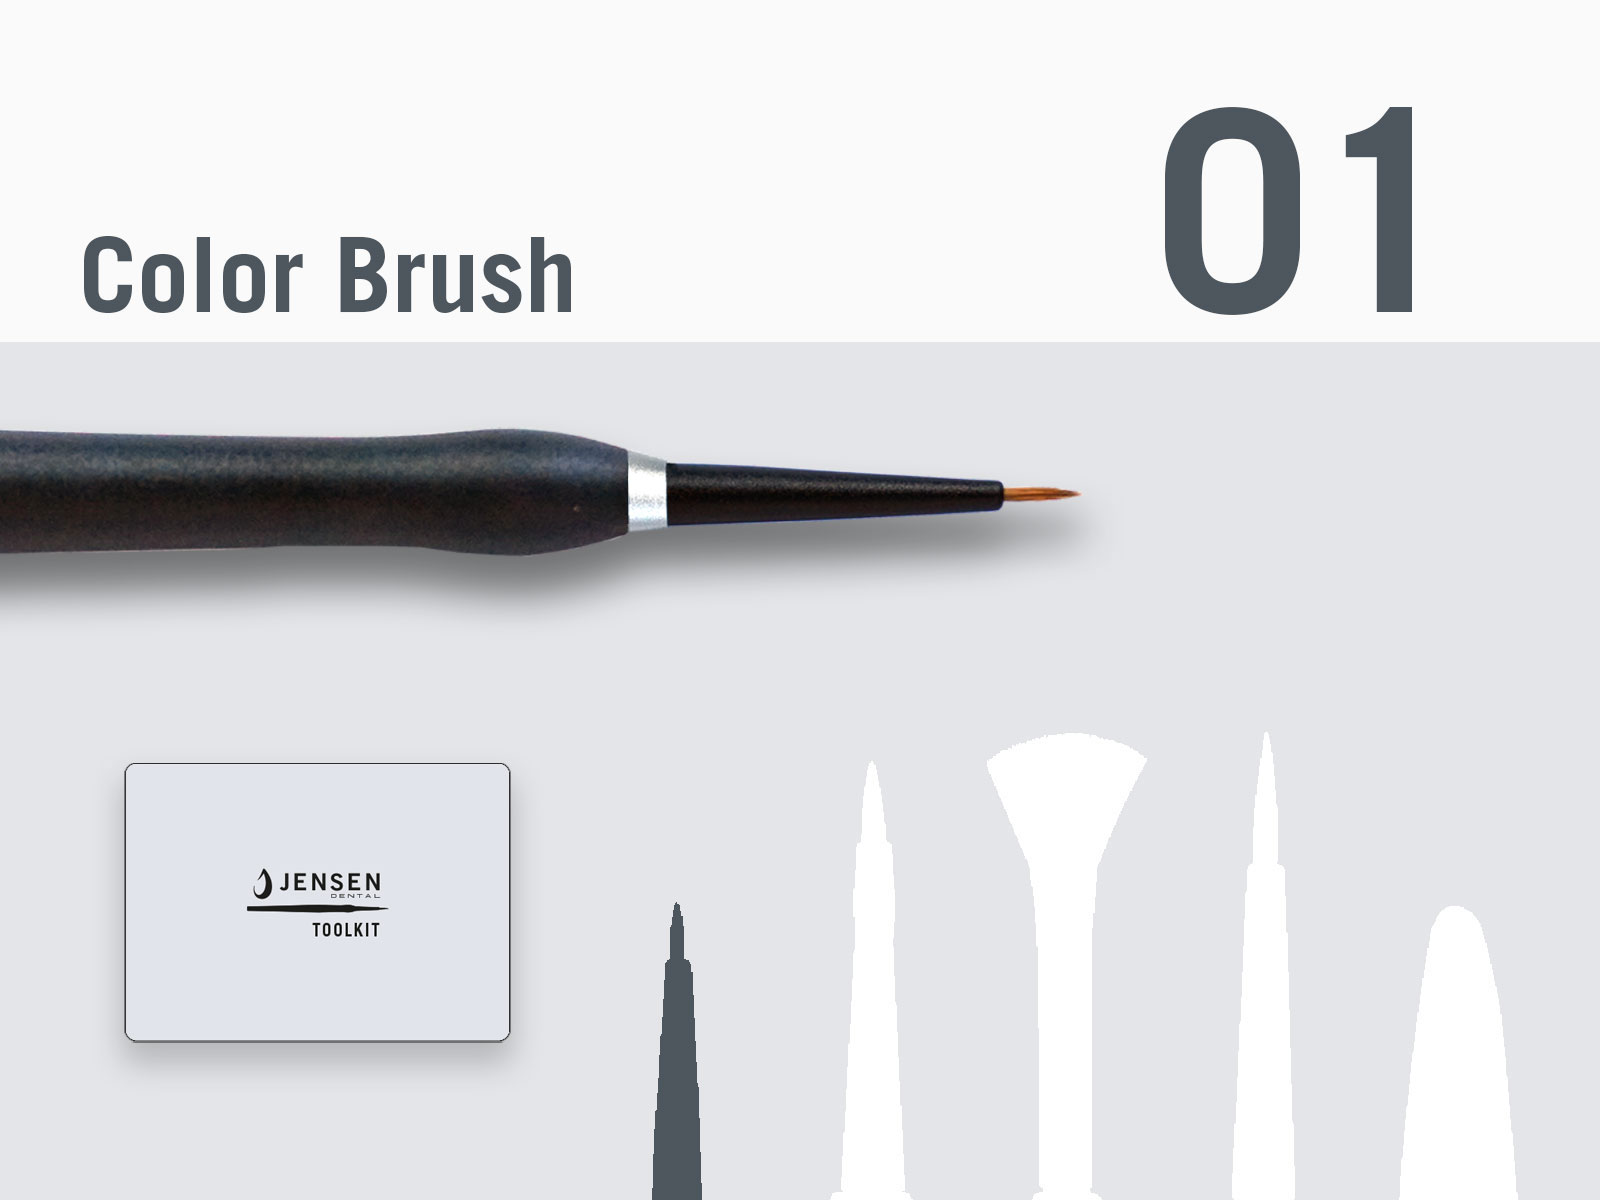 Color brush with replaceable brush tip